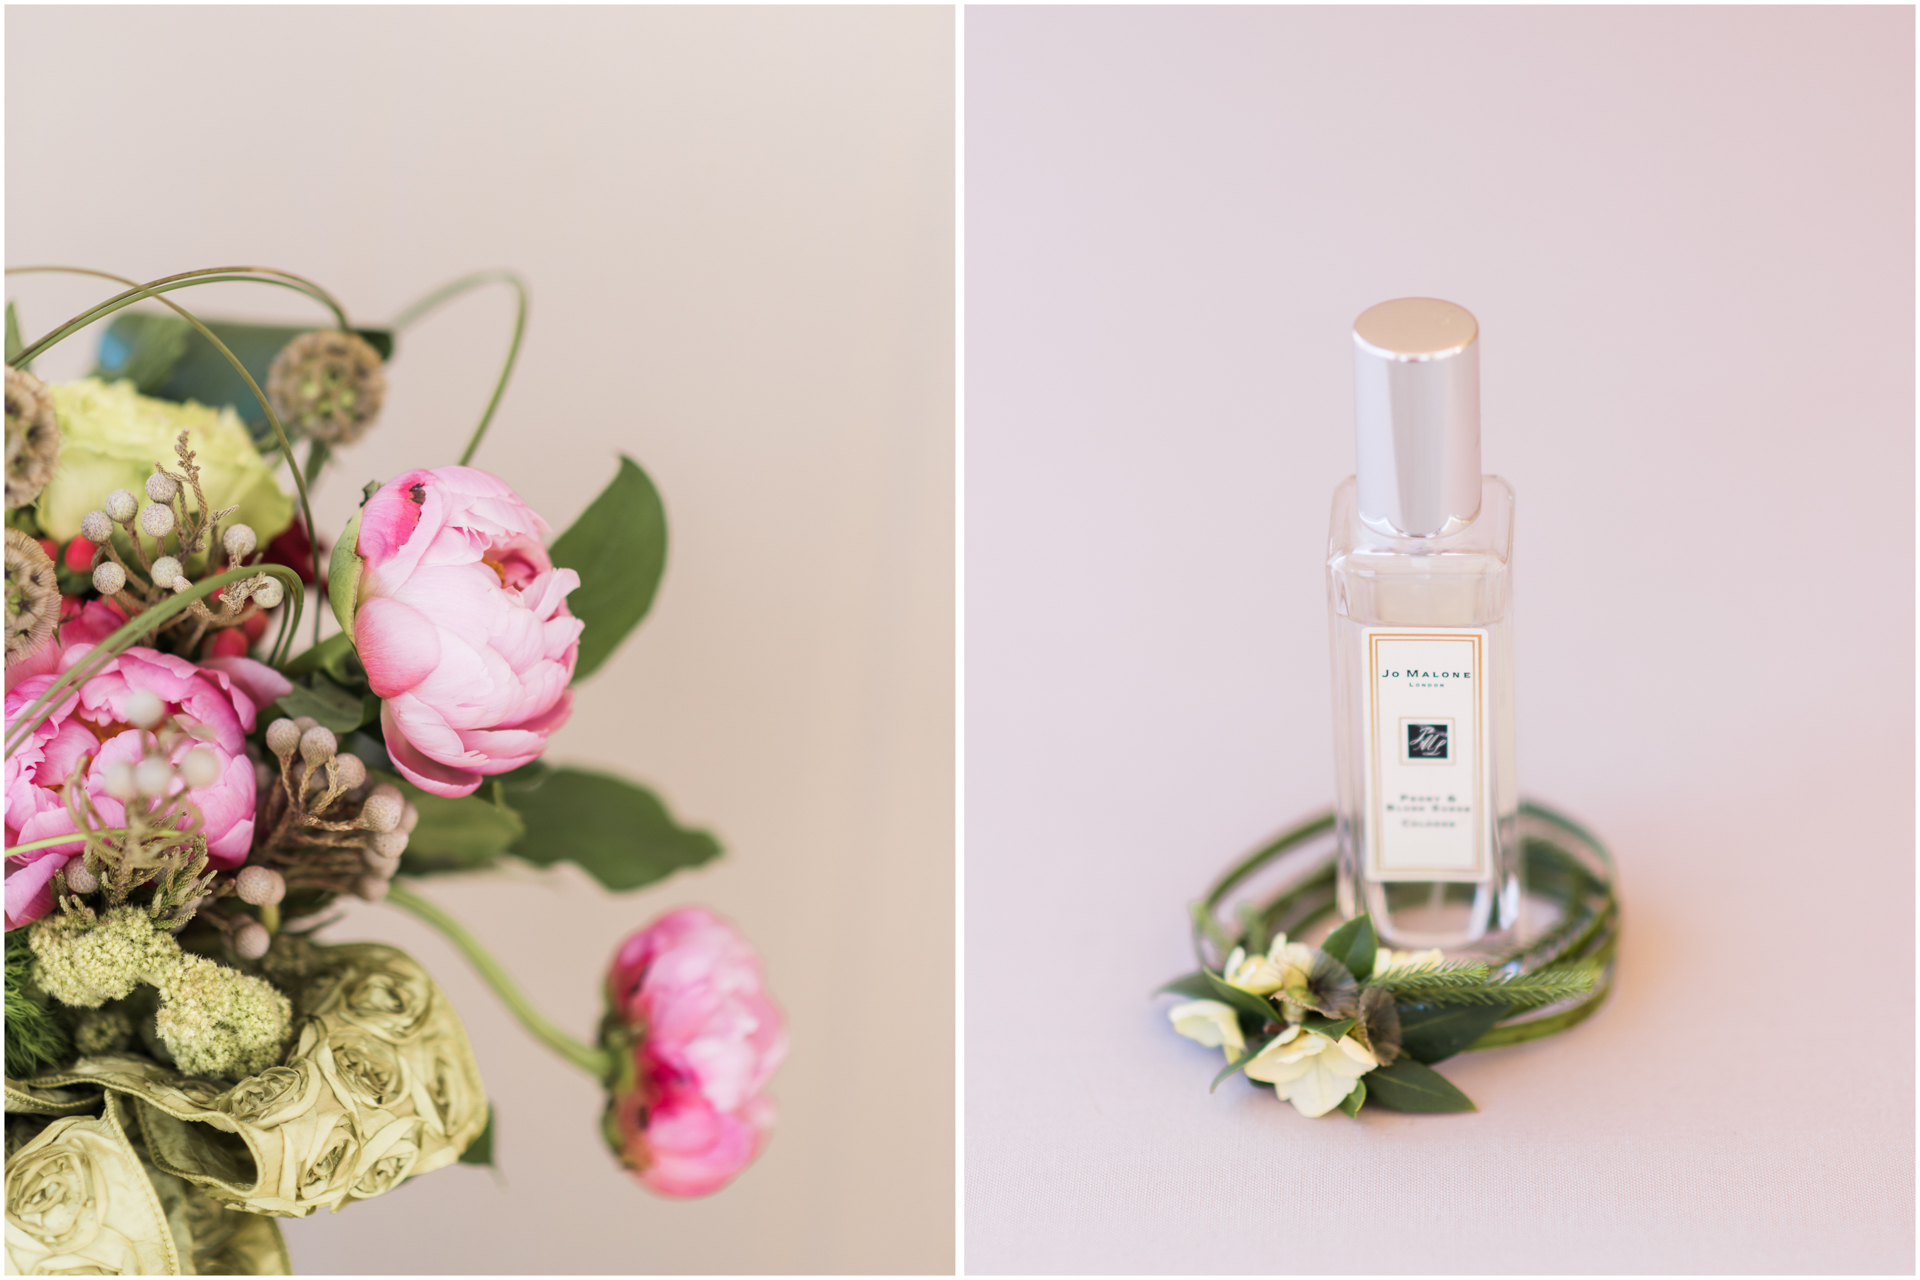 Jo Malone perfume - bottle photographed in flower ring